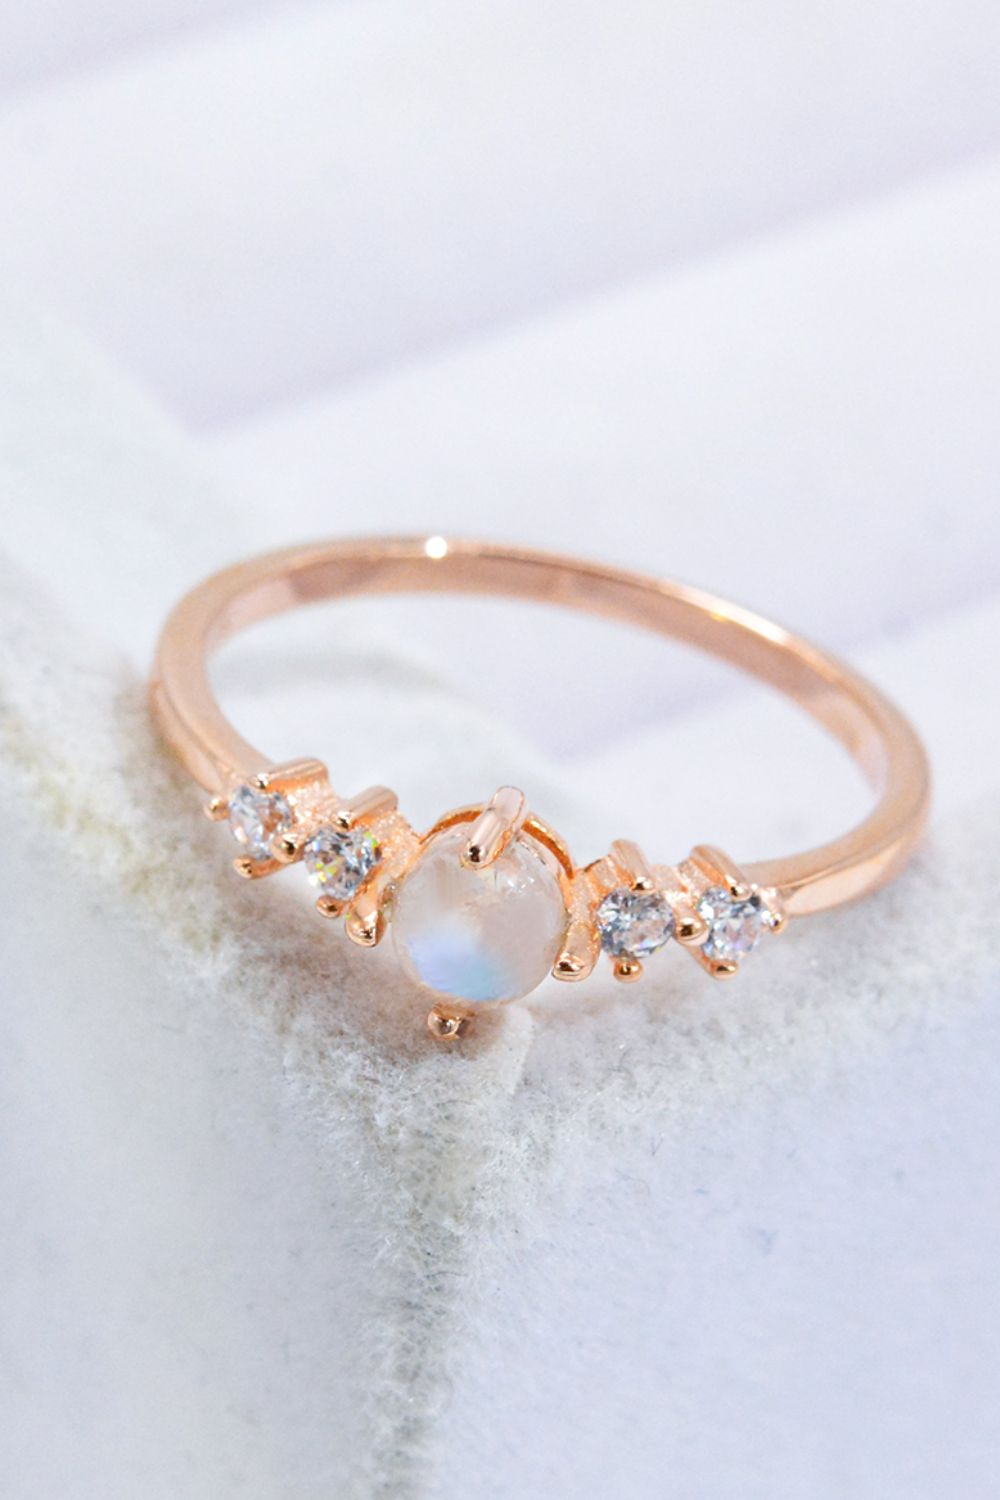 Light Gray Natural Moonstone and Zircon 18K Rose Gold-Plated Ring Sentient Beauty Fashions rings